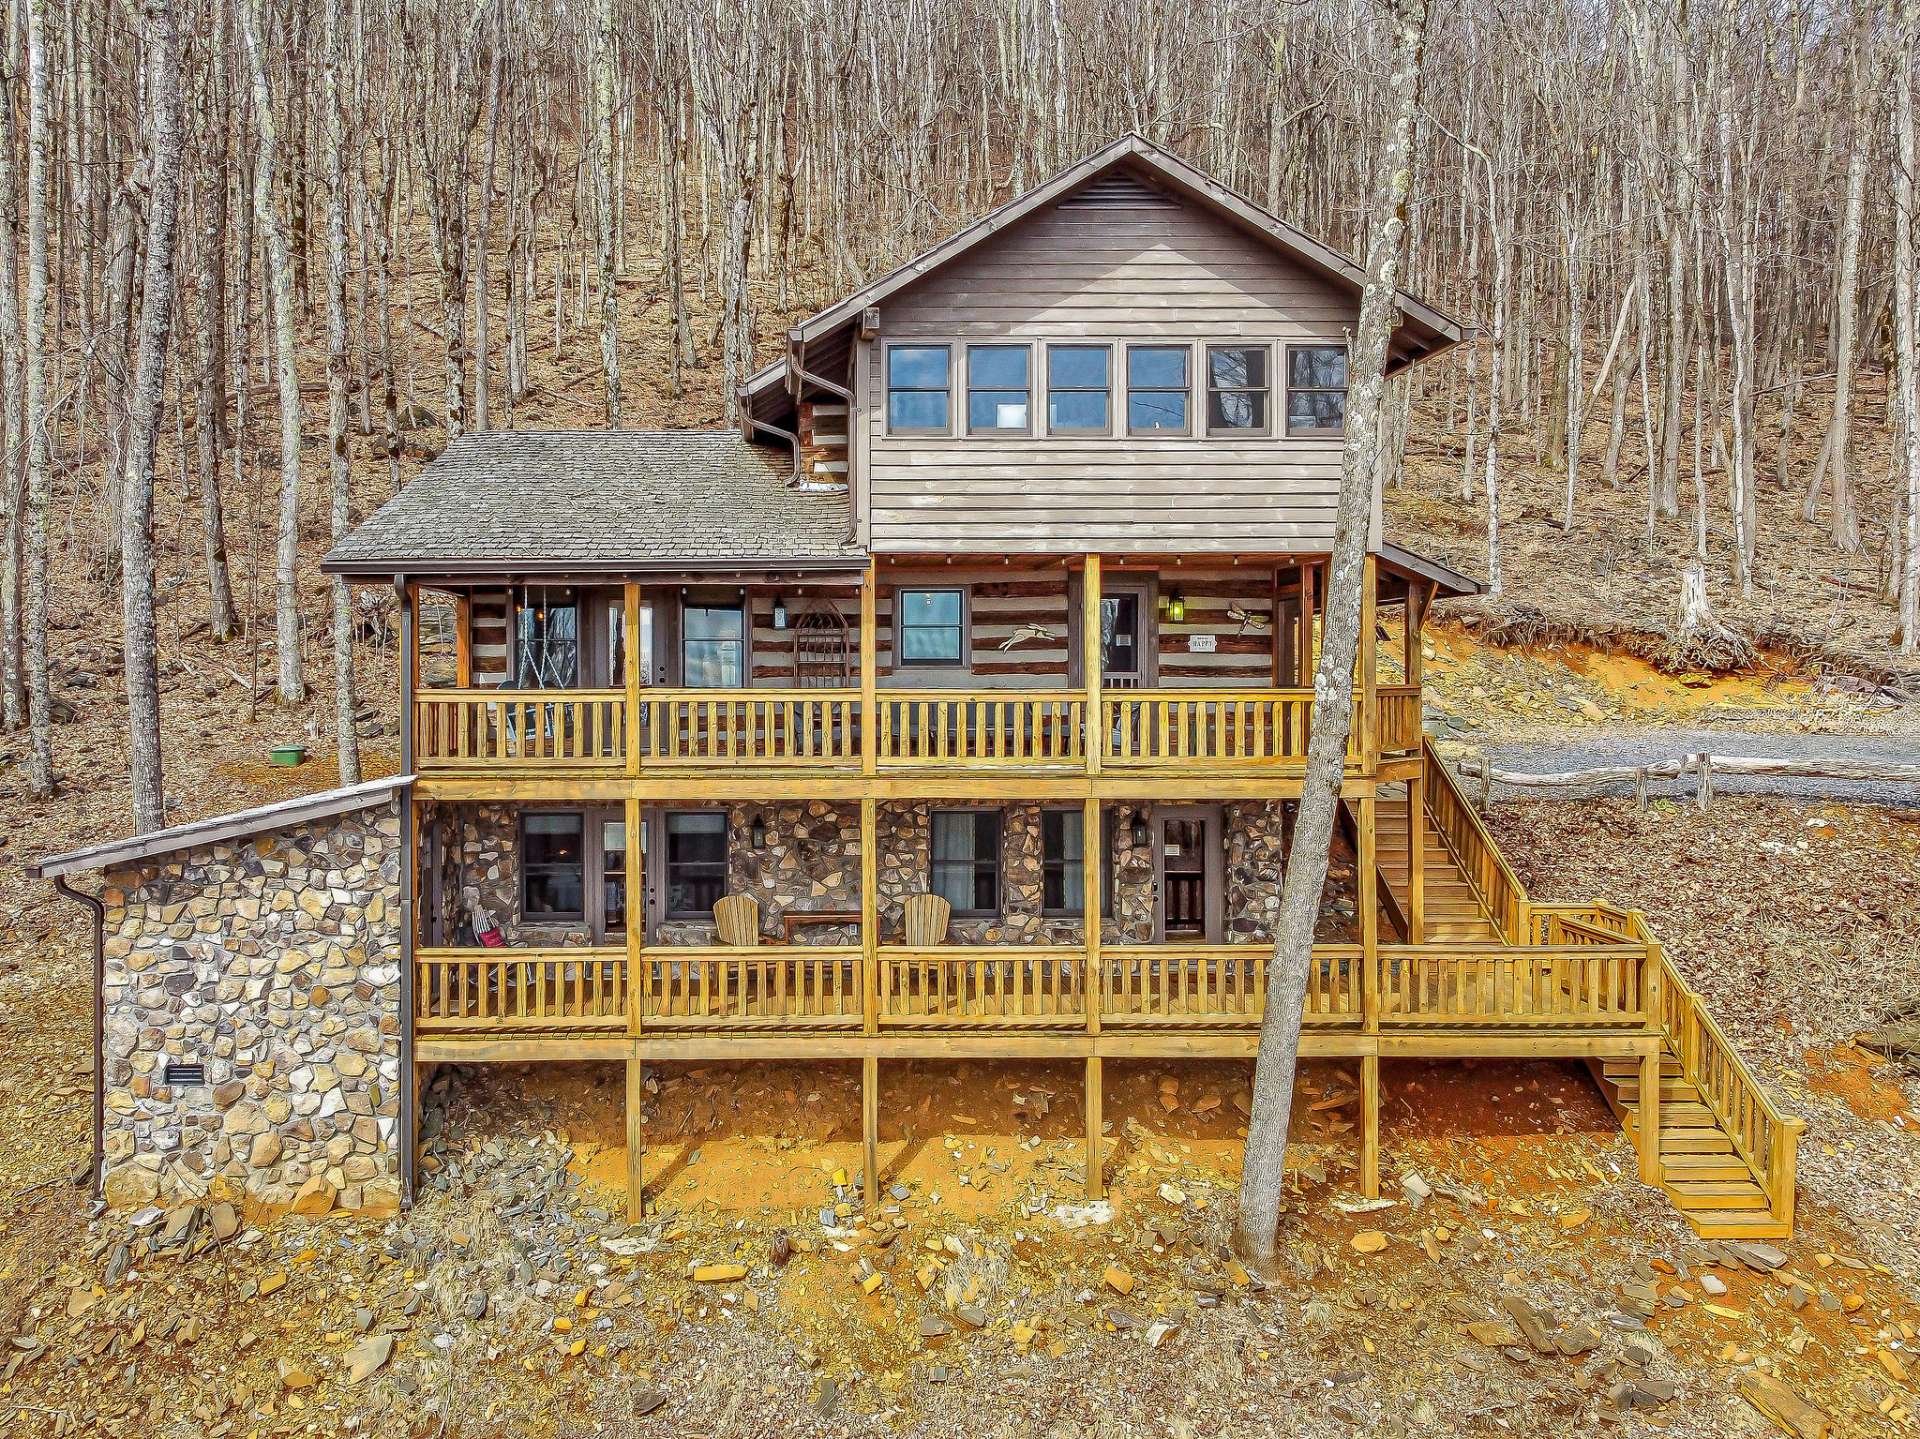 Additional highlights include a whole-house generator, and a storage room on the lower deck, providing ample space for storing outdoor gear and essentials.